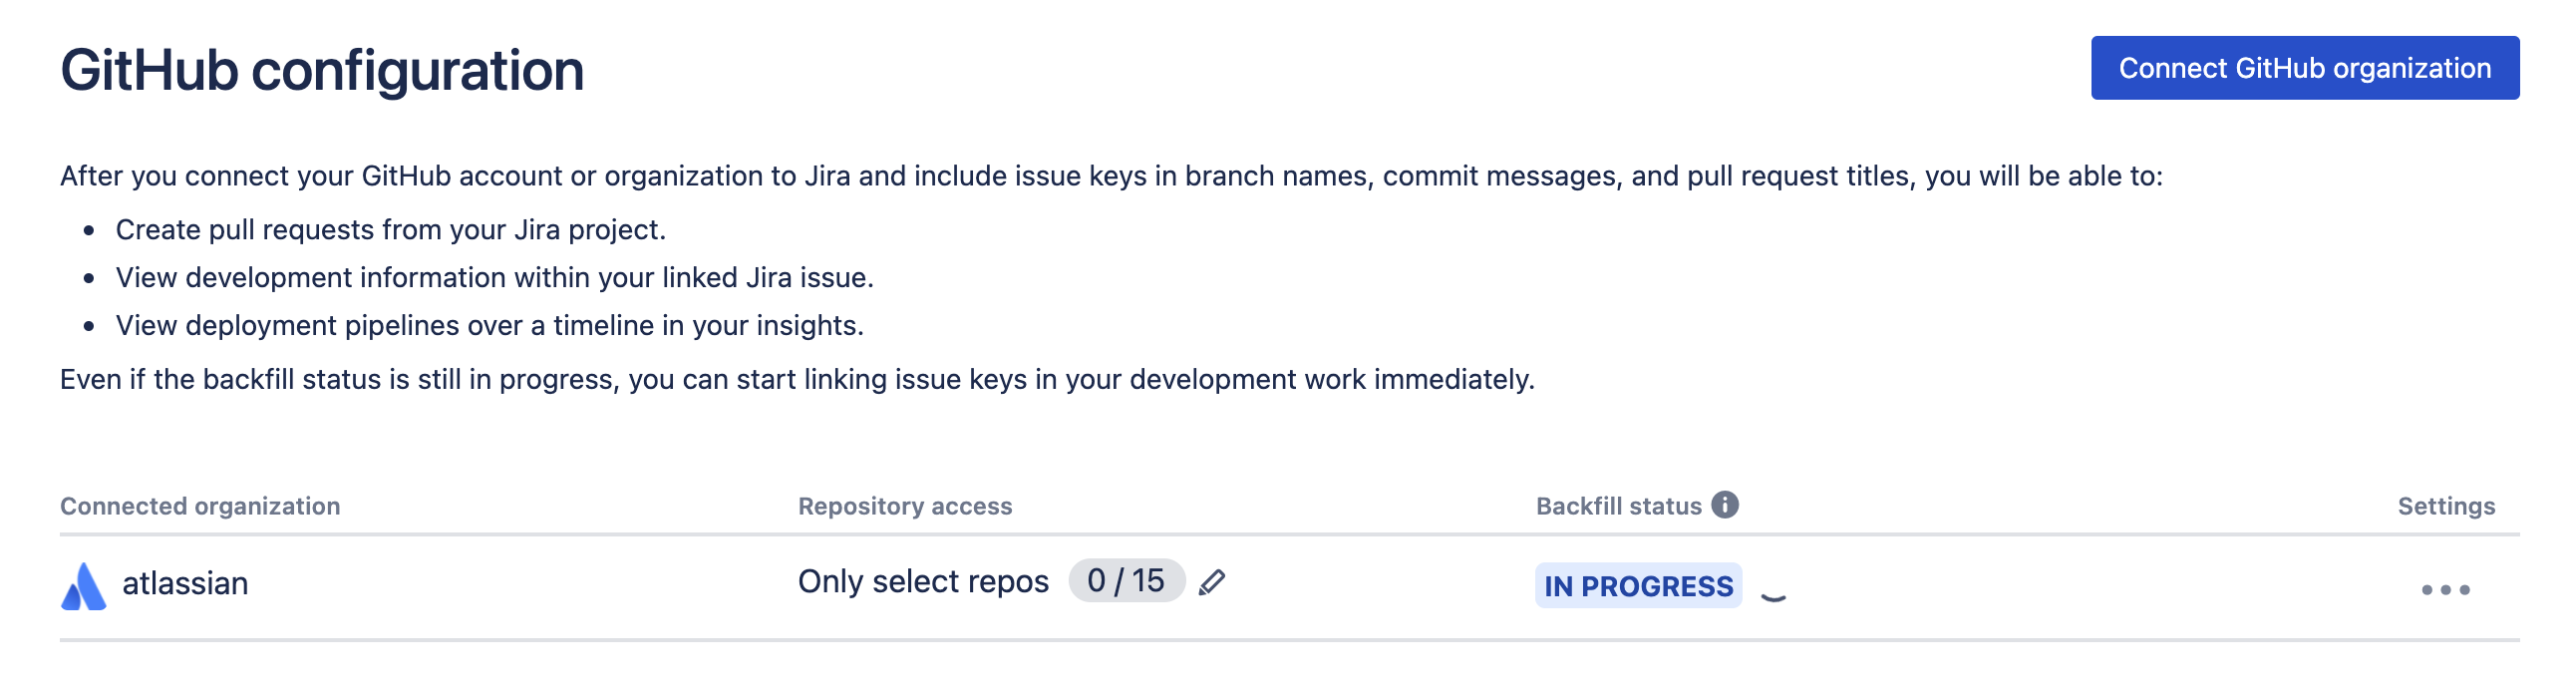 GitHub configuration page in Jira, showing a connected organization